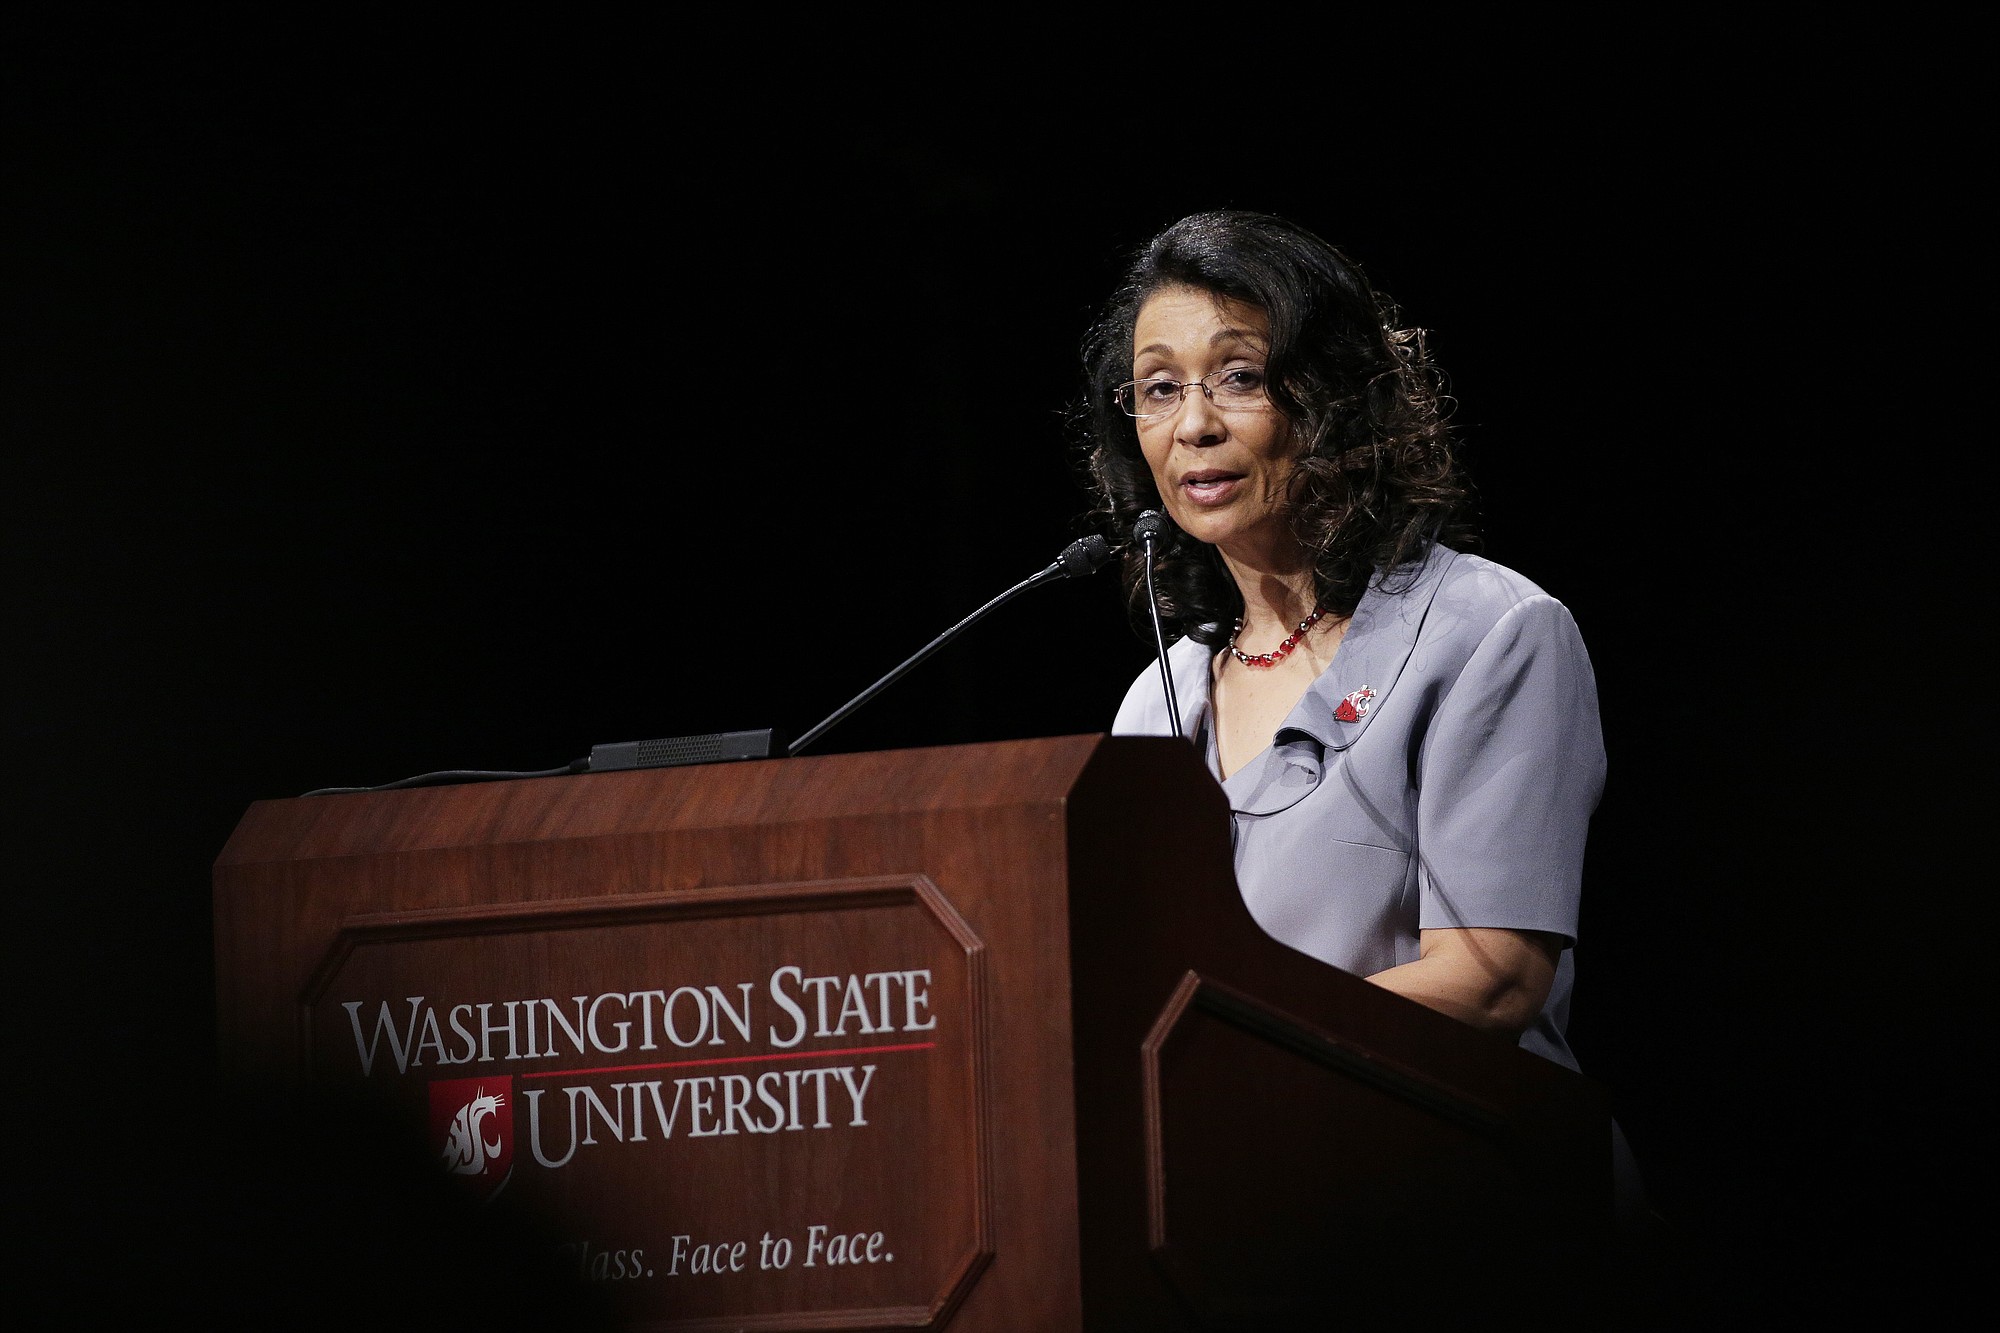 Carmento Floyd speaks Wednesday during a memorial service for her husband and the late Washington State University President Elson Floyd, who passed away in June due to complications from colon cancer, at Beasley Coliseum on the school's campus in Pullman.